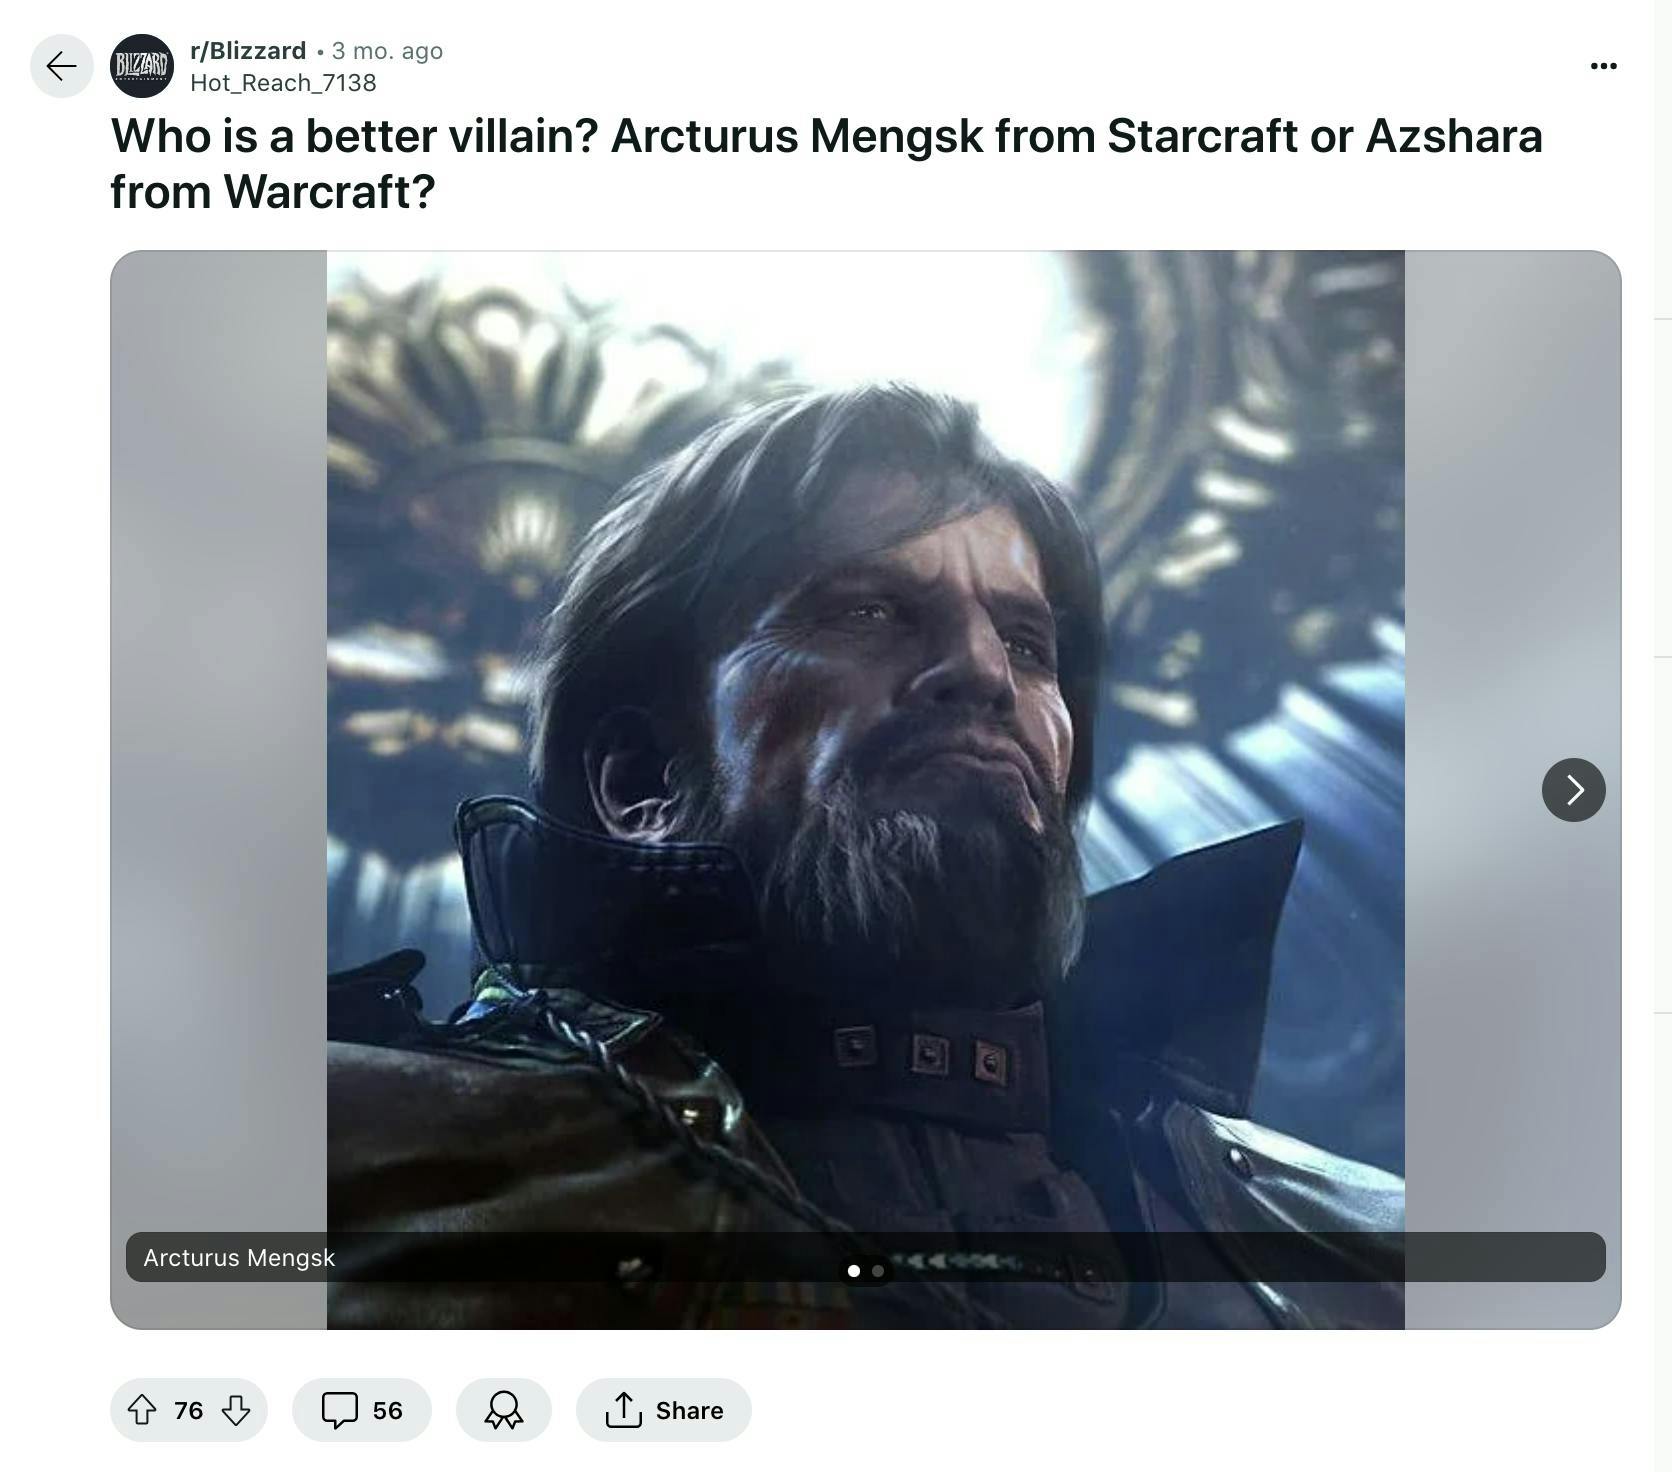 A screenshot of a post on the r/Blizzard subreddit titled "Who is a better villain? Arcturus Mengsk from Starcraft or Azshara from Warcraft?" with 56 comments.